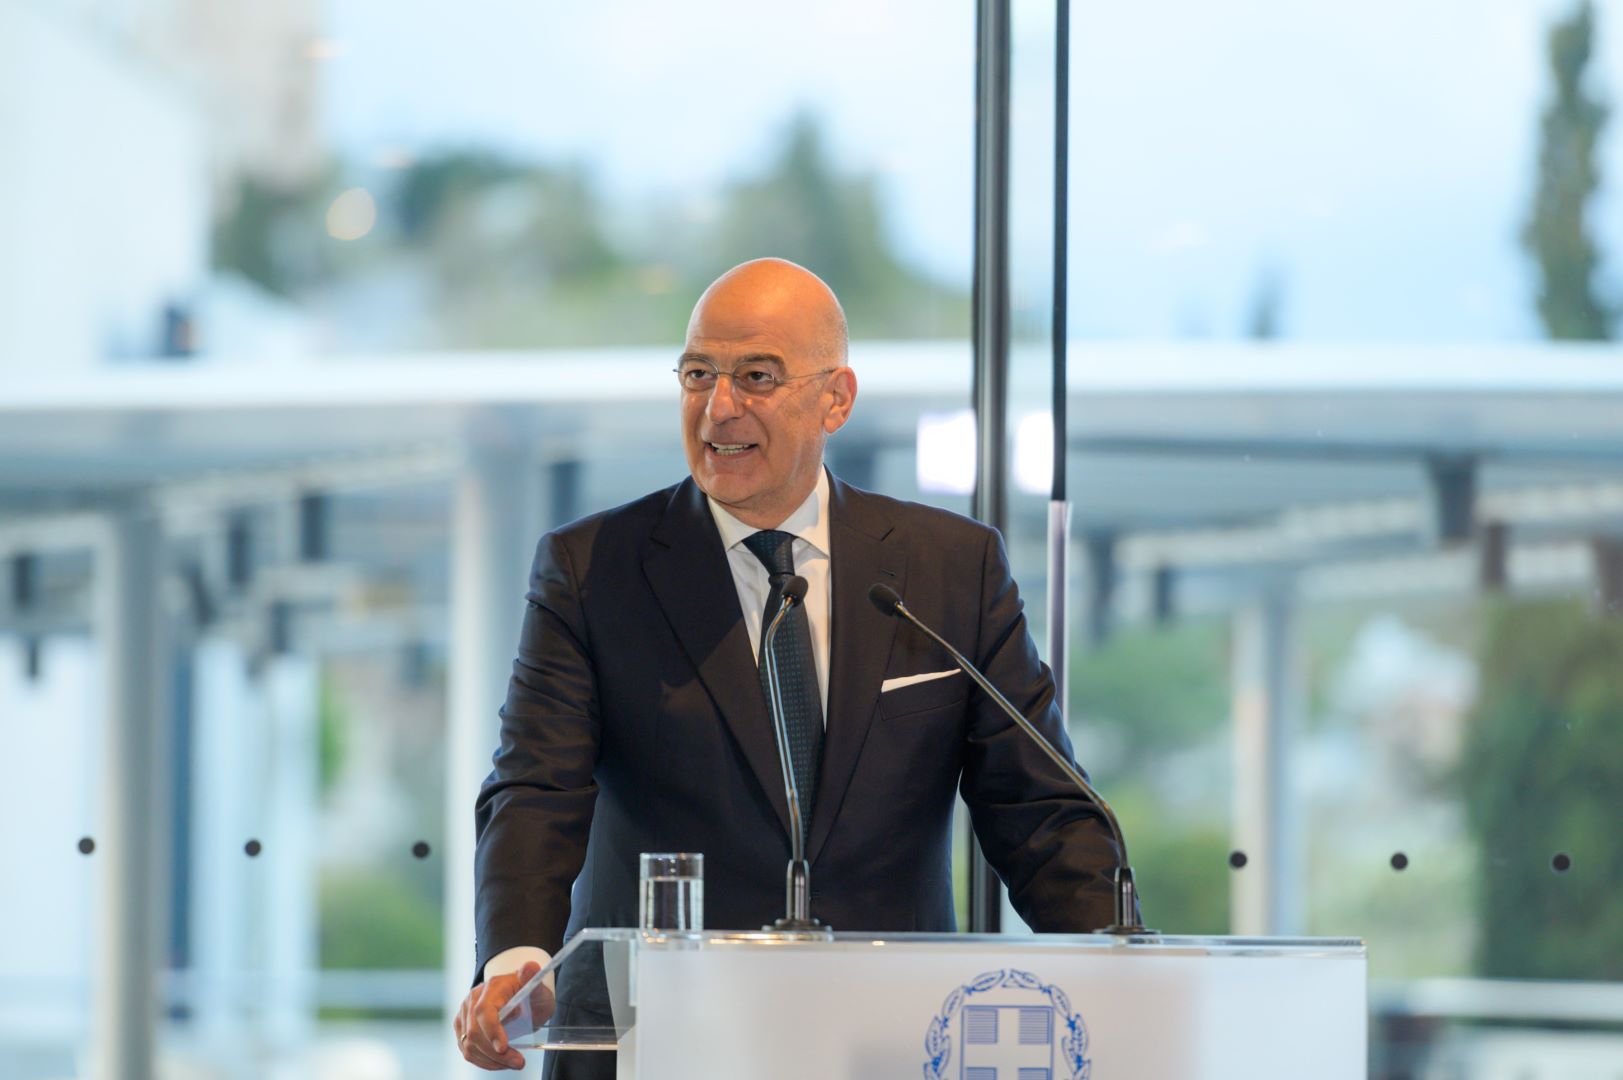 Minister of Foreign Affairs Nikos Dendias’ speech at the event of the presentation of Greece's candidacy for a non-permanent seat on the UN Security Council for the 2025-2026 term (Acropolis Museum, 26.04.2023)